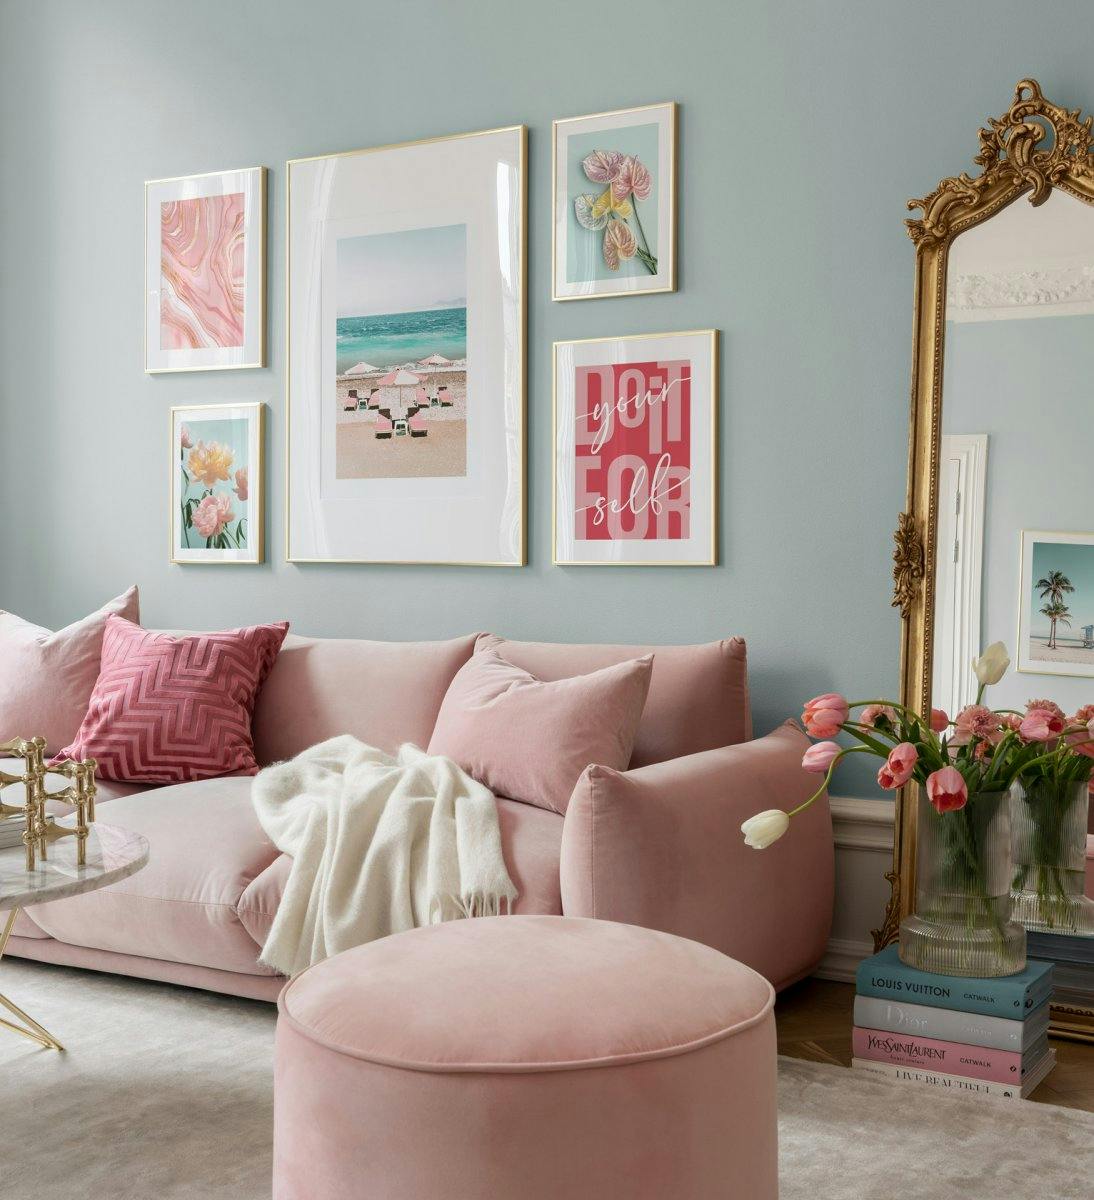 Playful photography and quote prints in bright pastel colours create a room that radiates trendiness